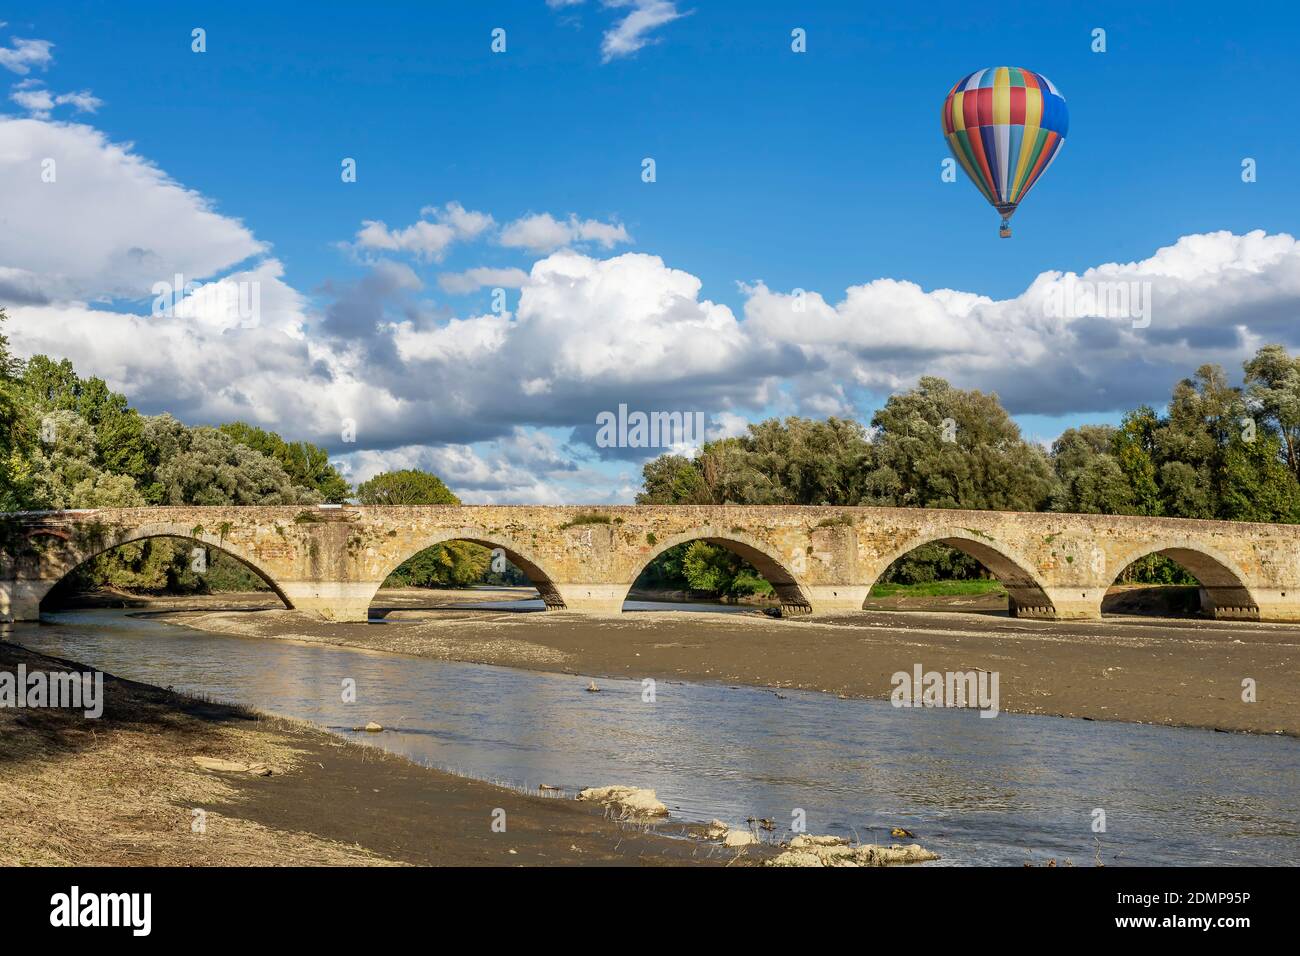 A colorful hot air balloon flies over the ancient Buriano Bridge, Arezzo, Italy Stock Photo